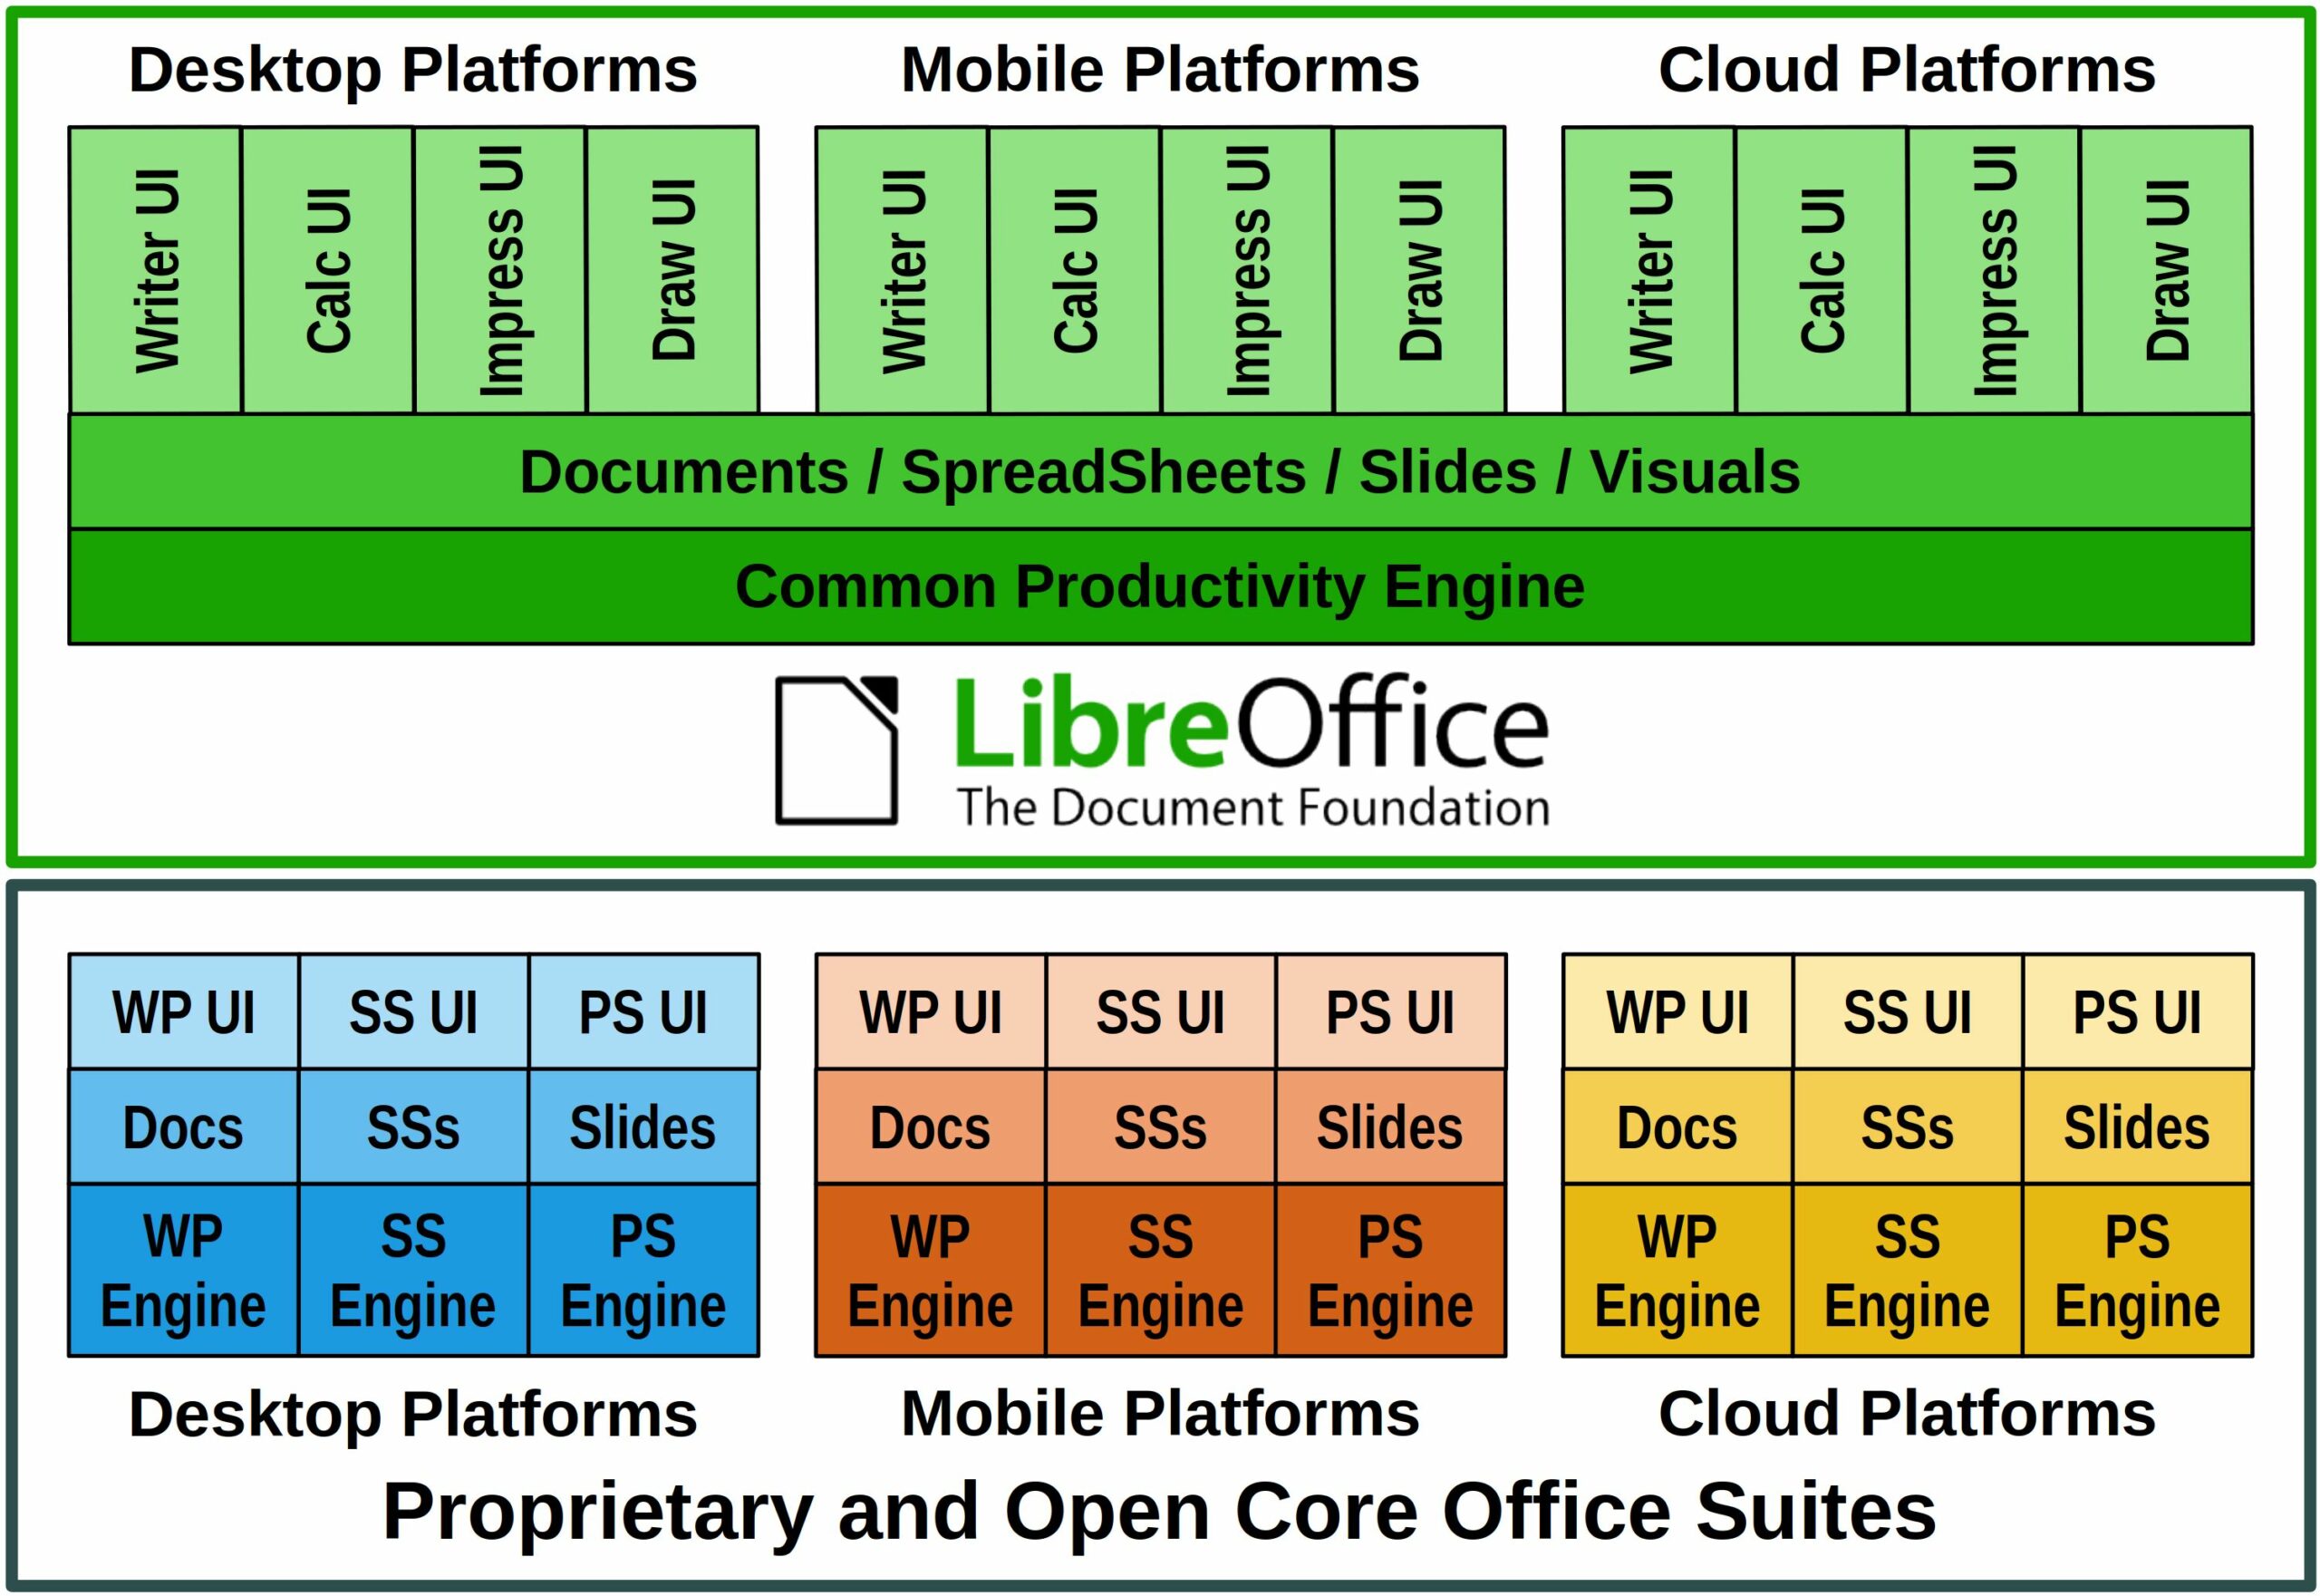 libreoffice vs microsoft office: Which is Better for You in 2023?